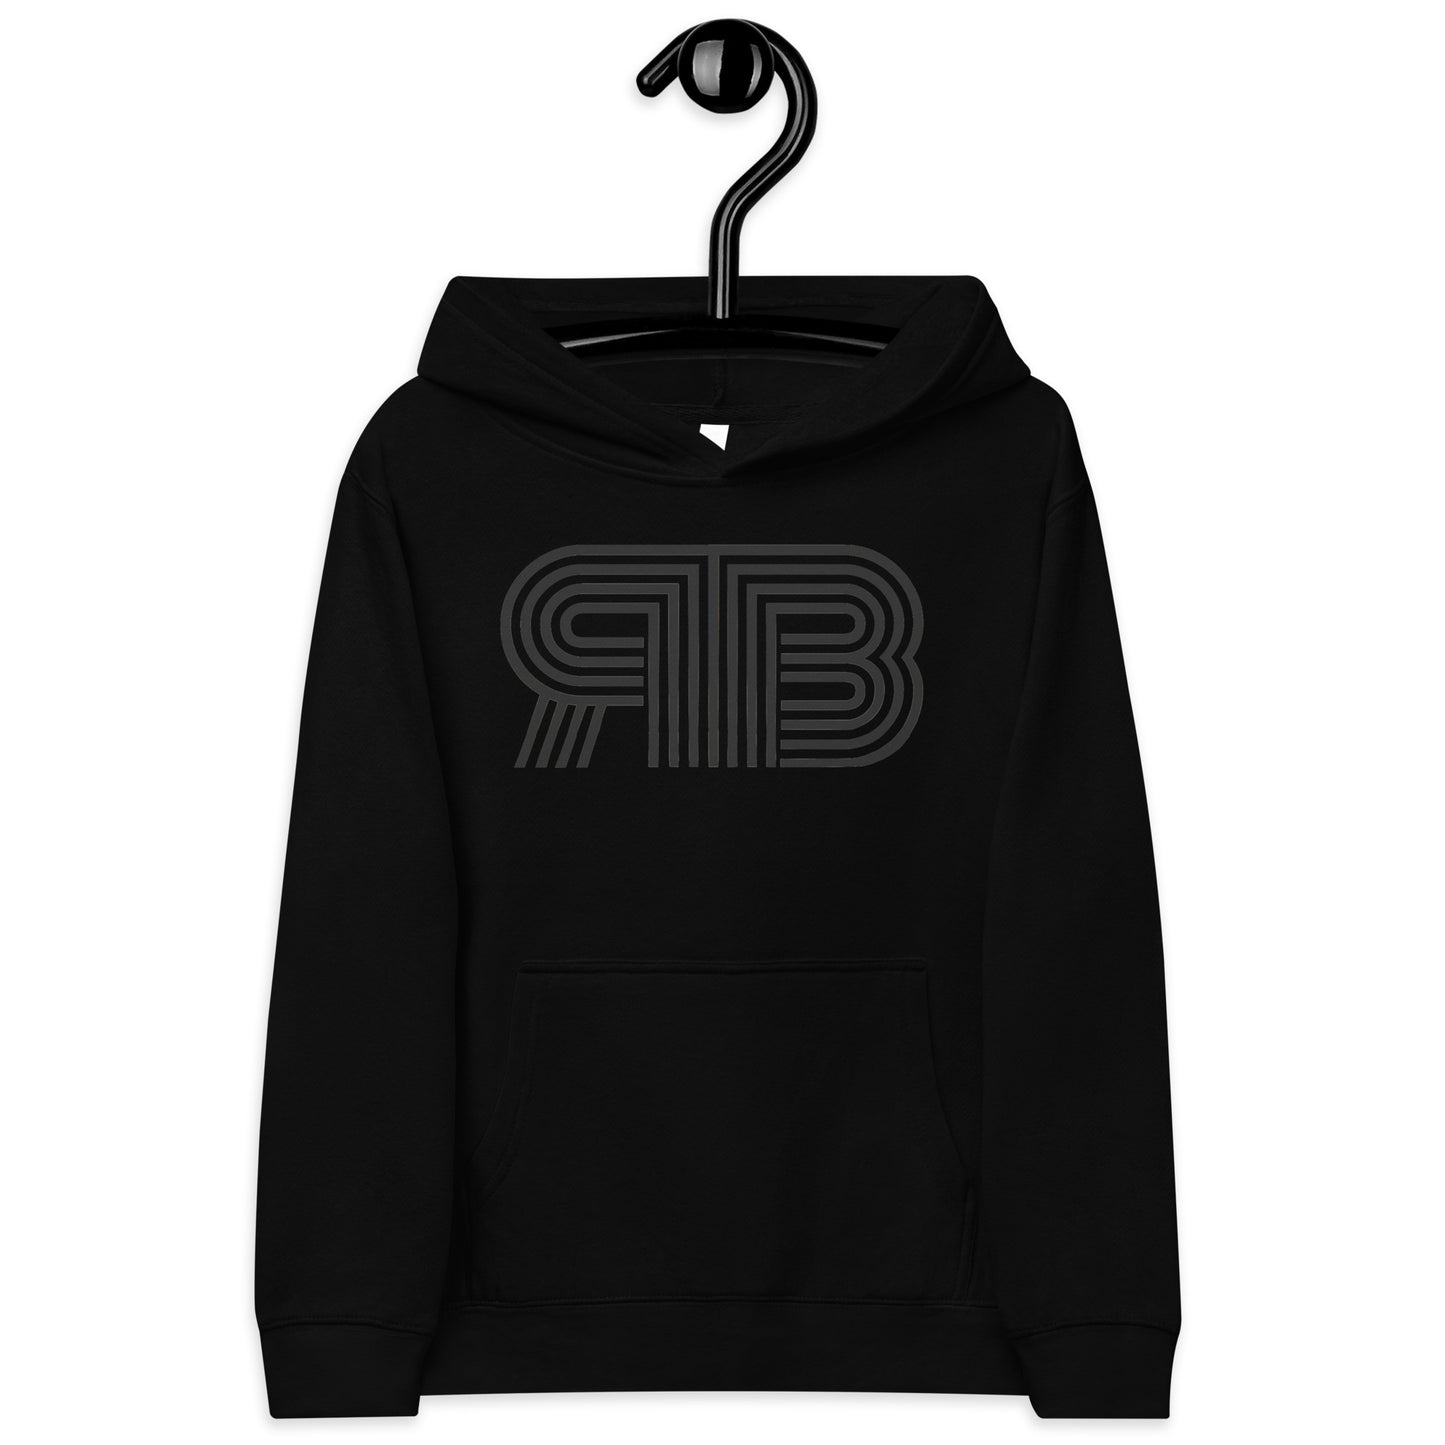 RB Youth Hoodie "Black-Out"